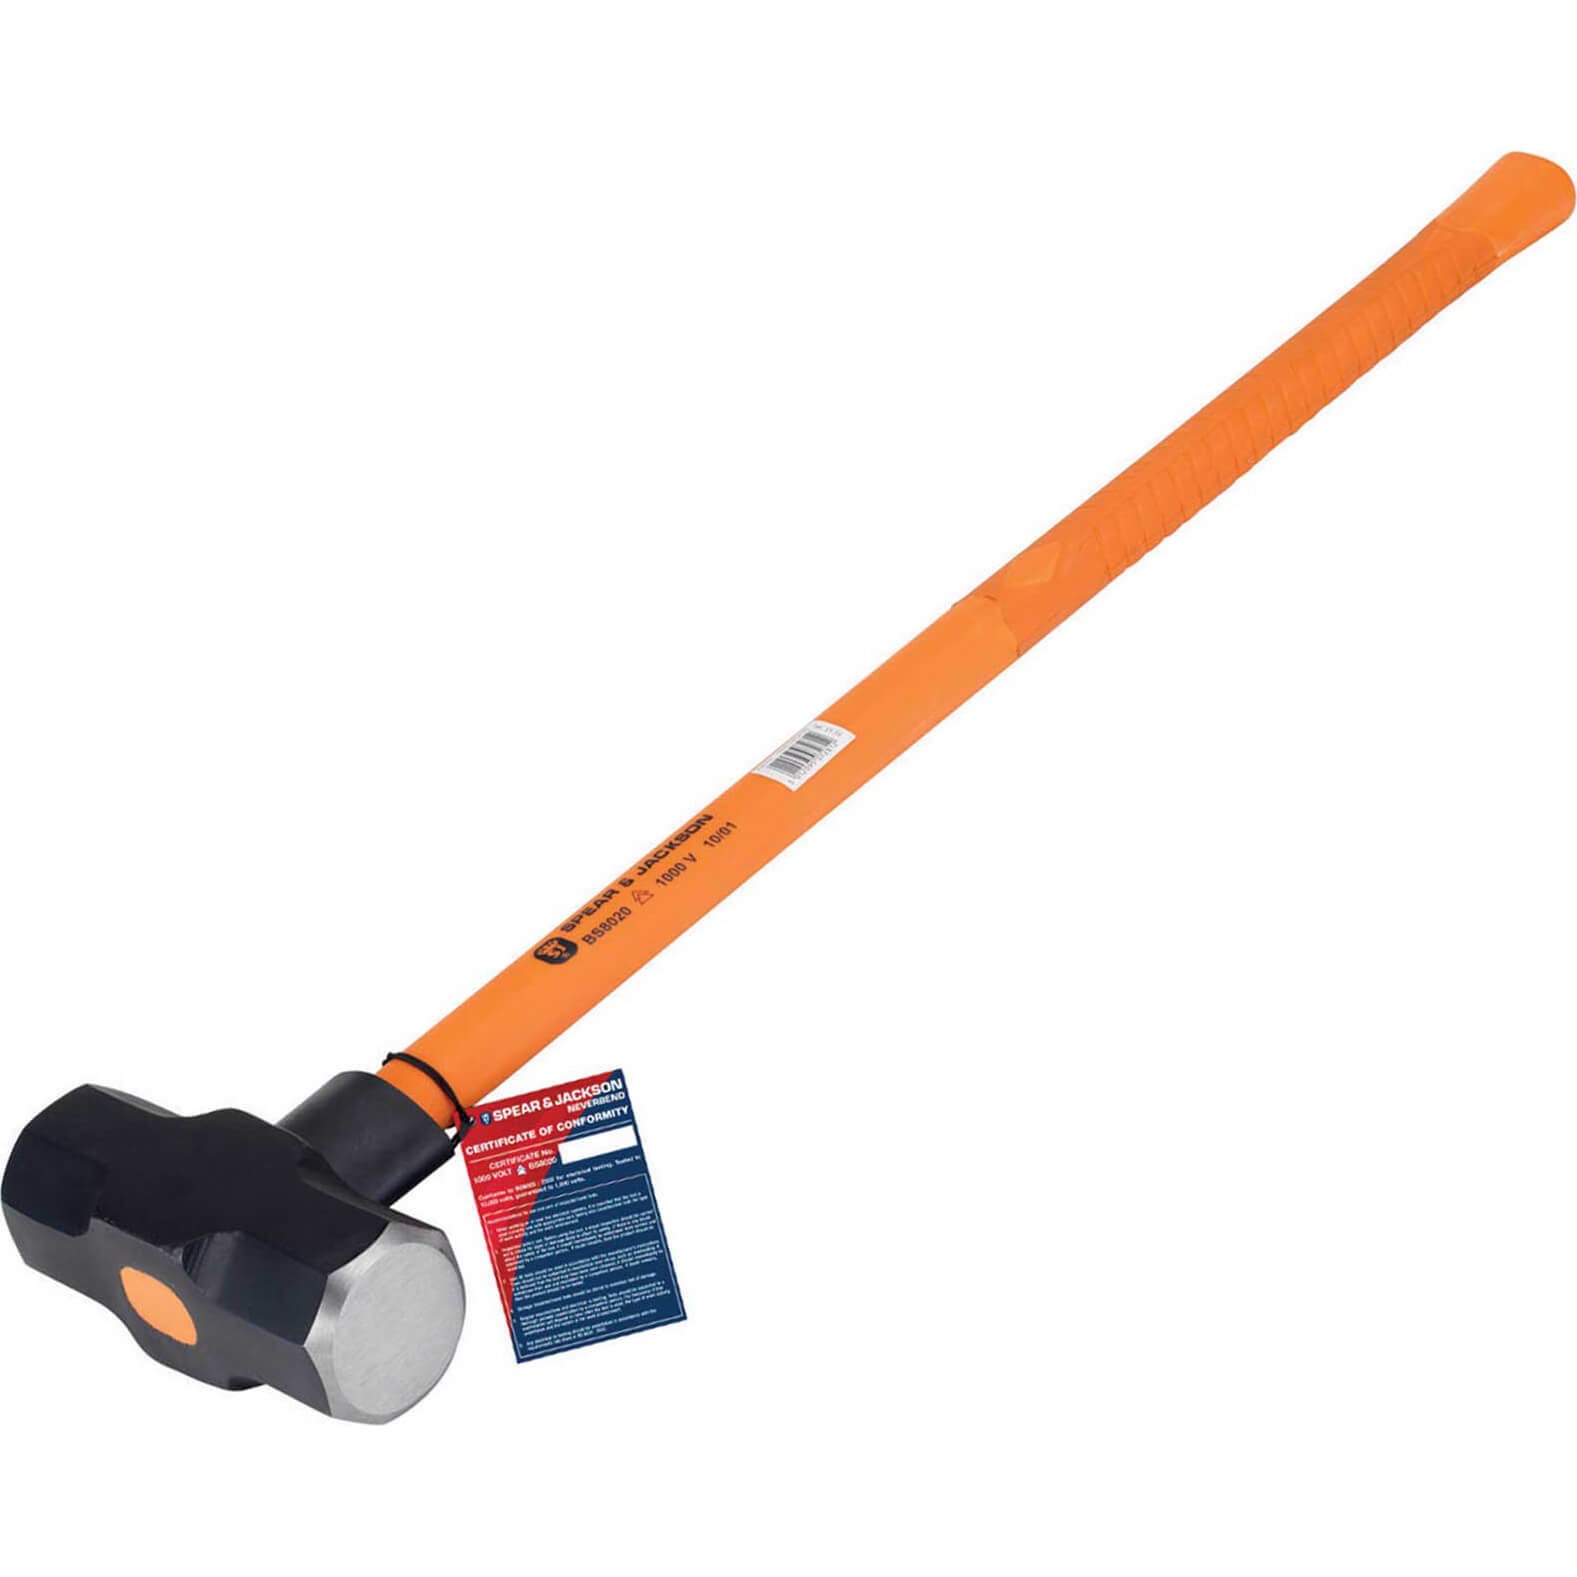 Photo of Spear And Jackson Insulated Sledge Hammer 6.4kg